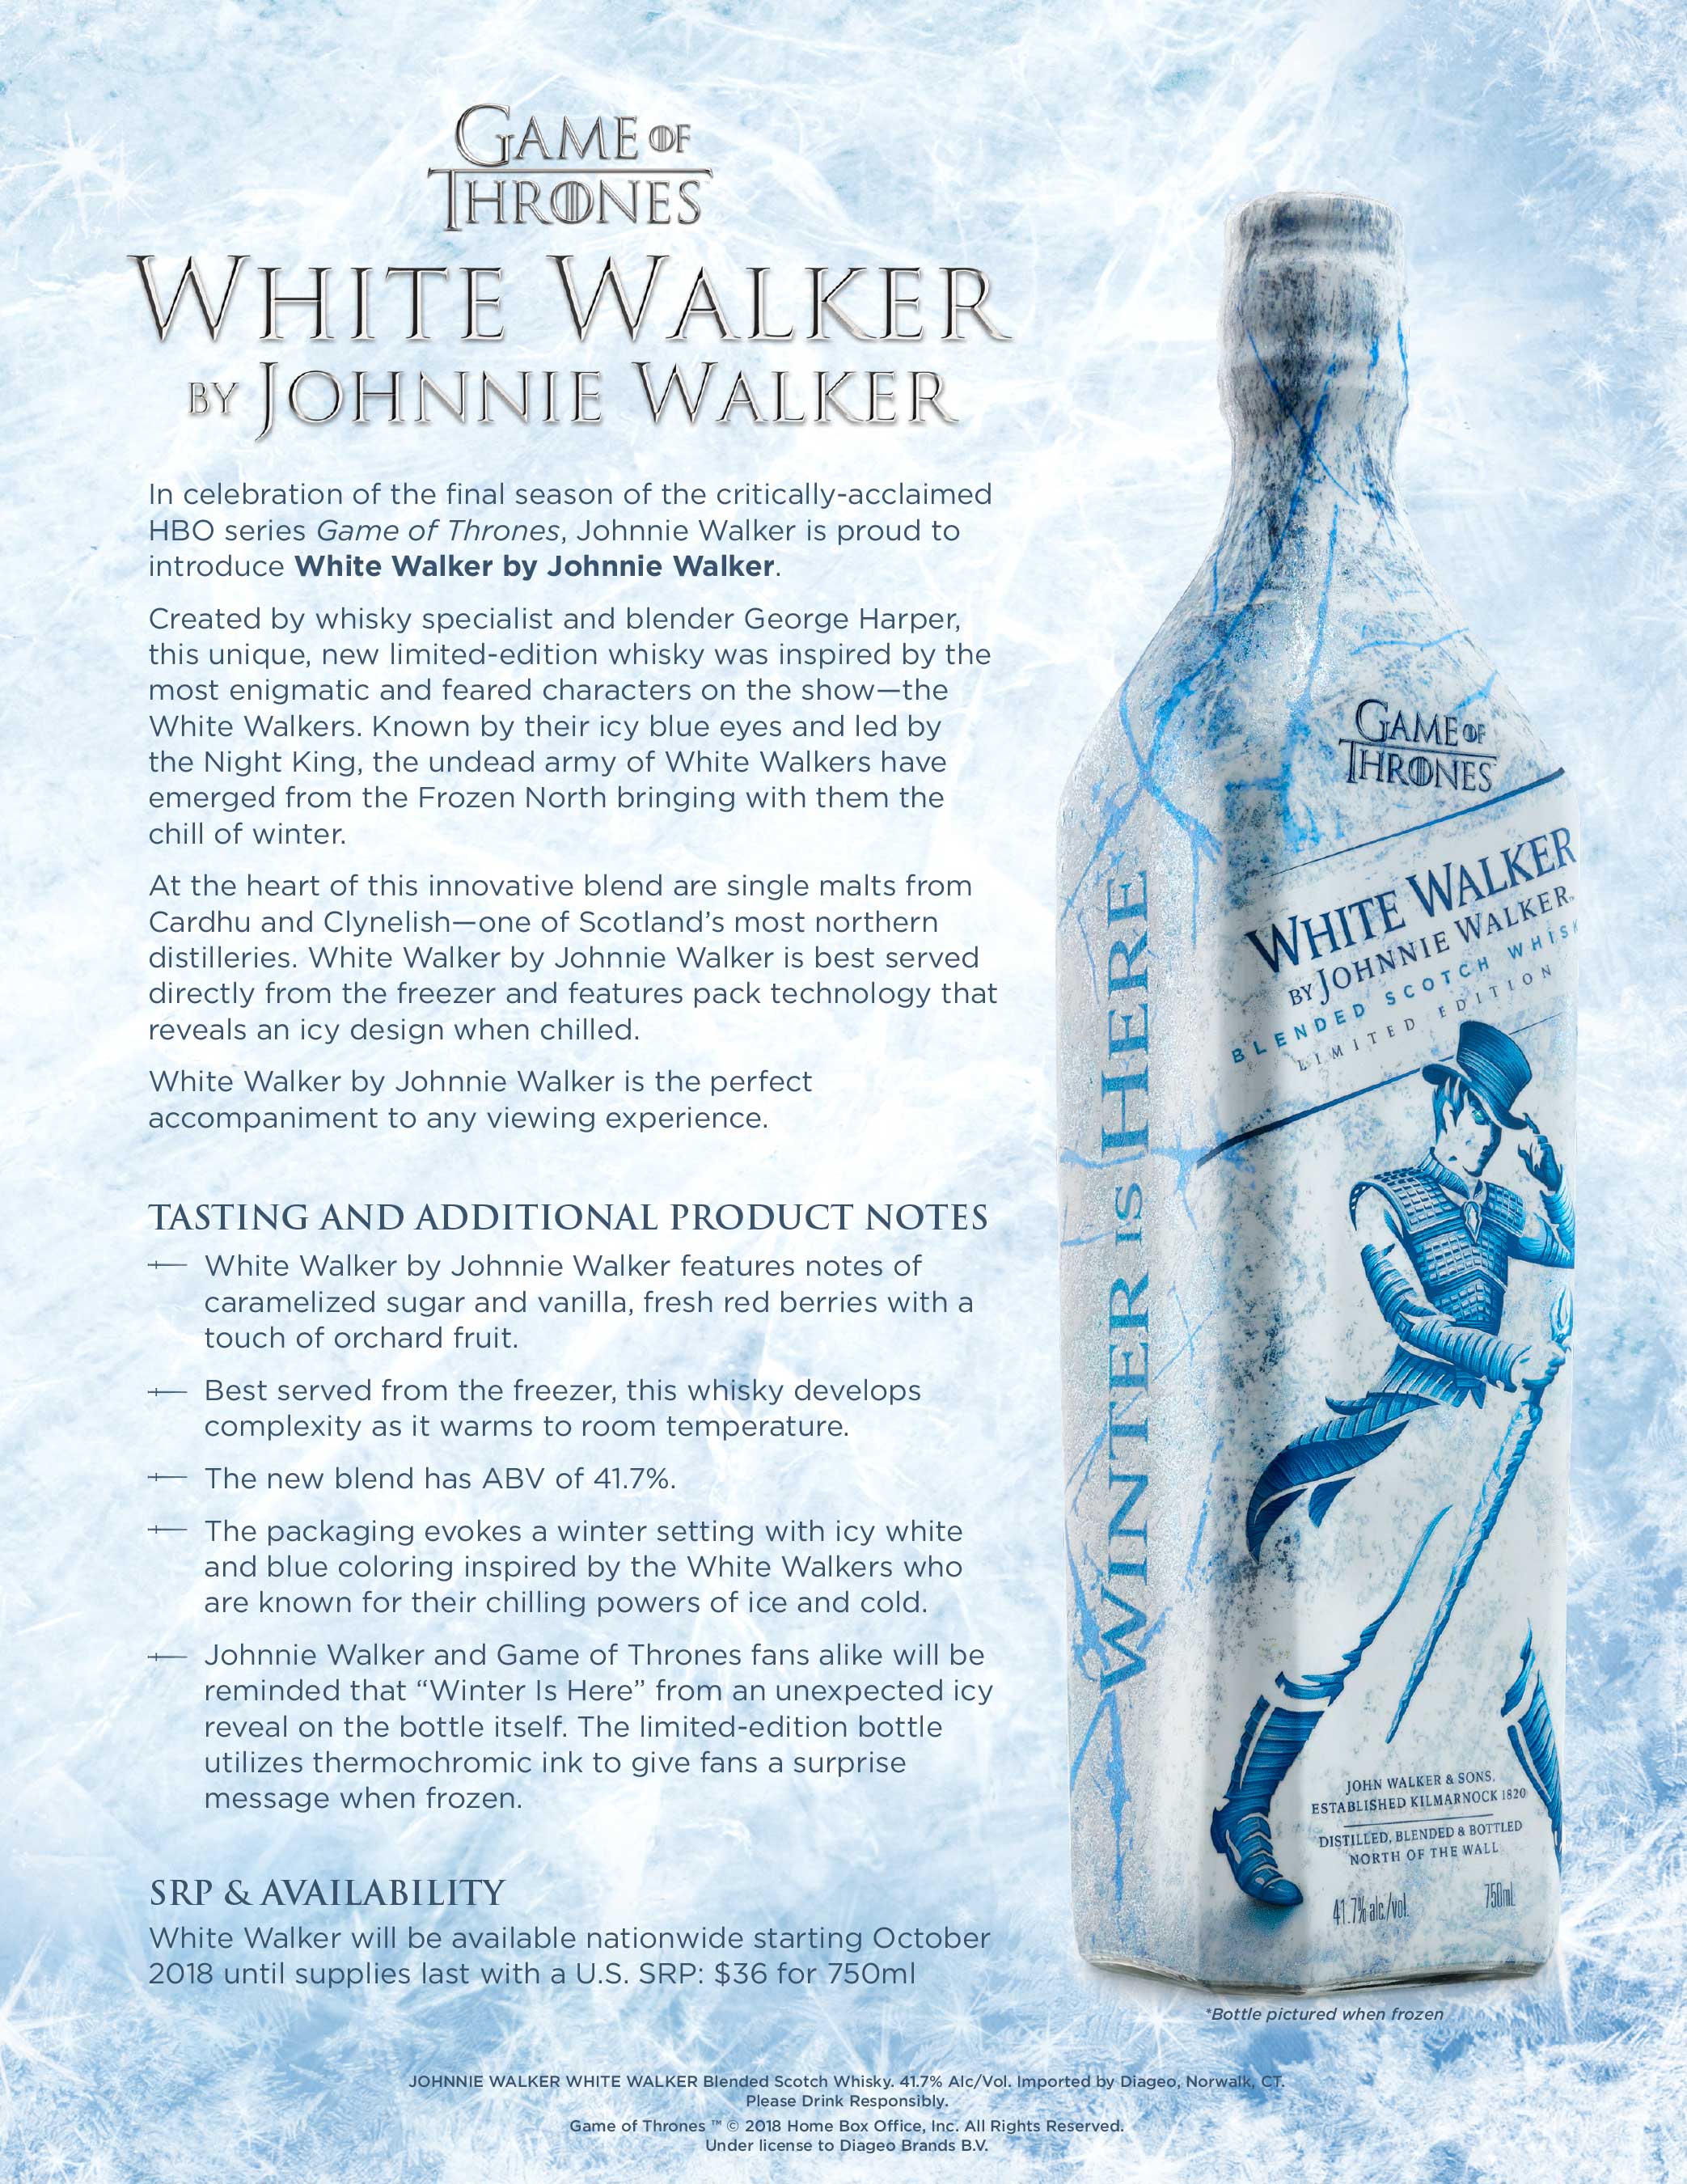 Learn more about White Walker by Johnnie Walker